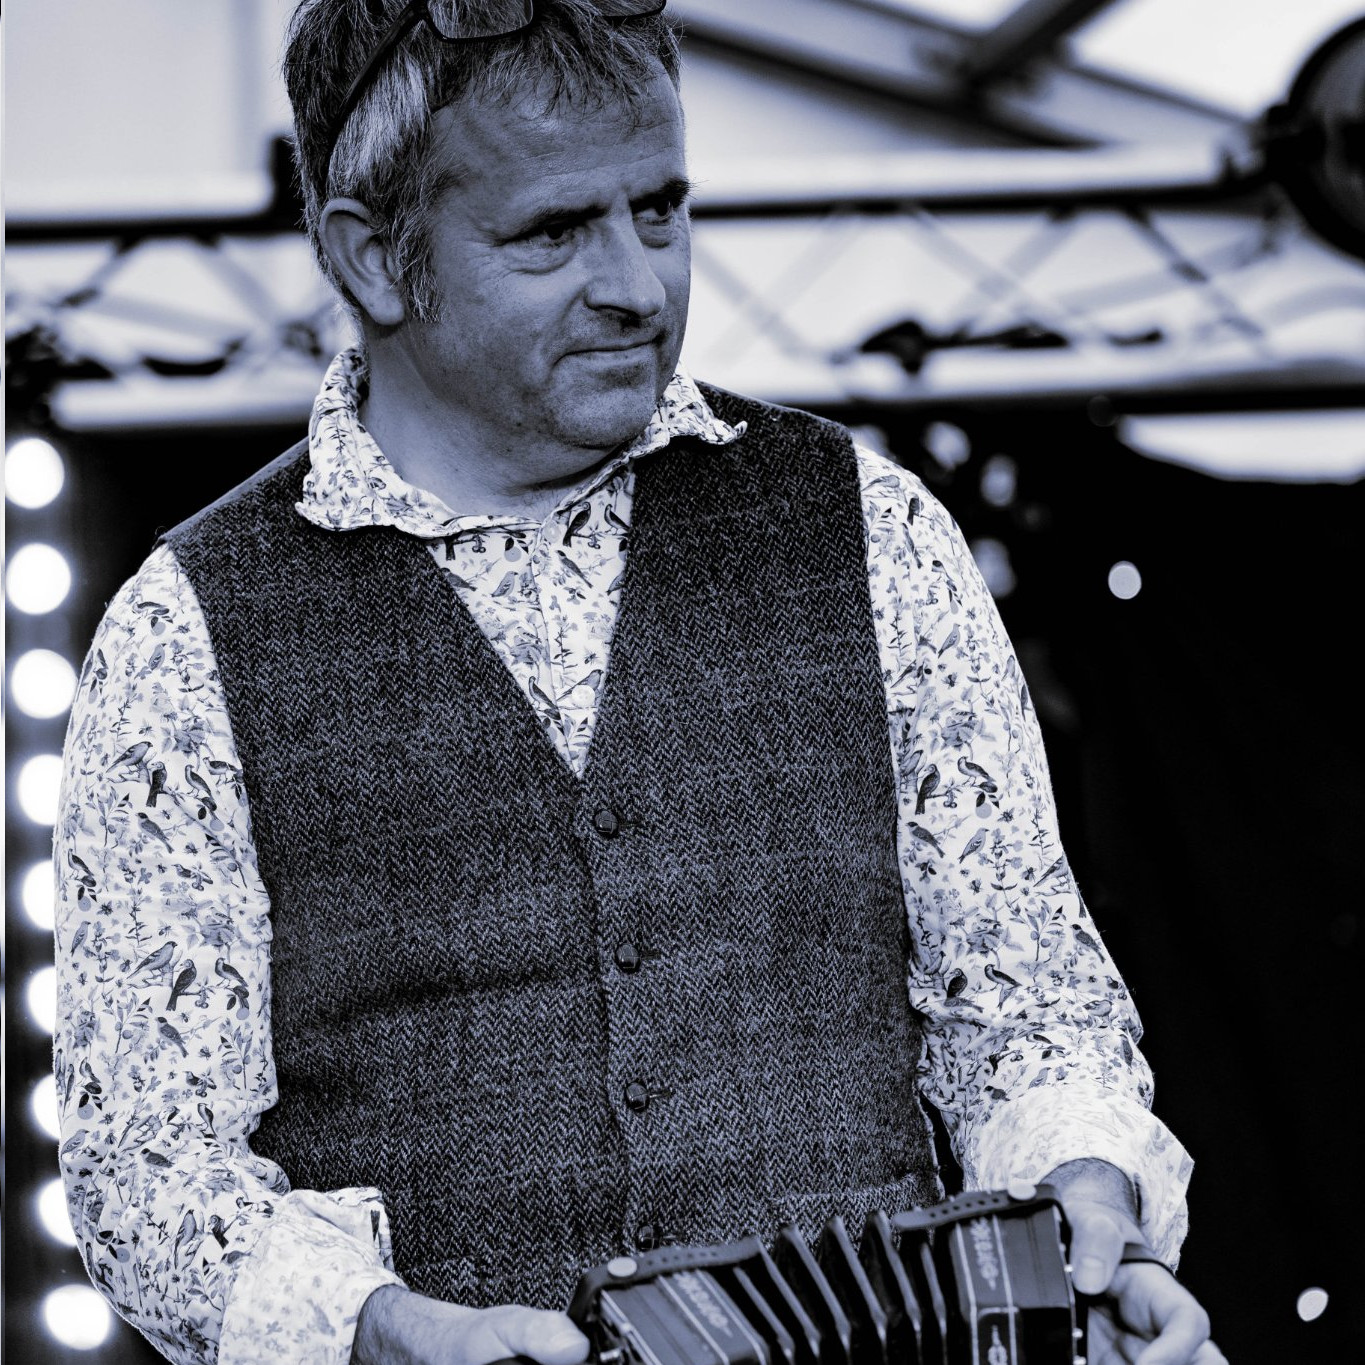 Christian Mayne, Concertina player and caller with The Freedom Fields Ceilidh Band